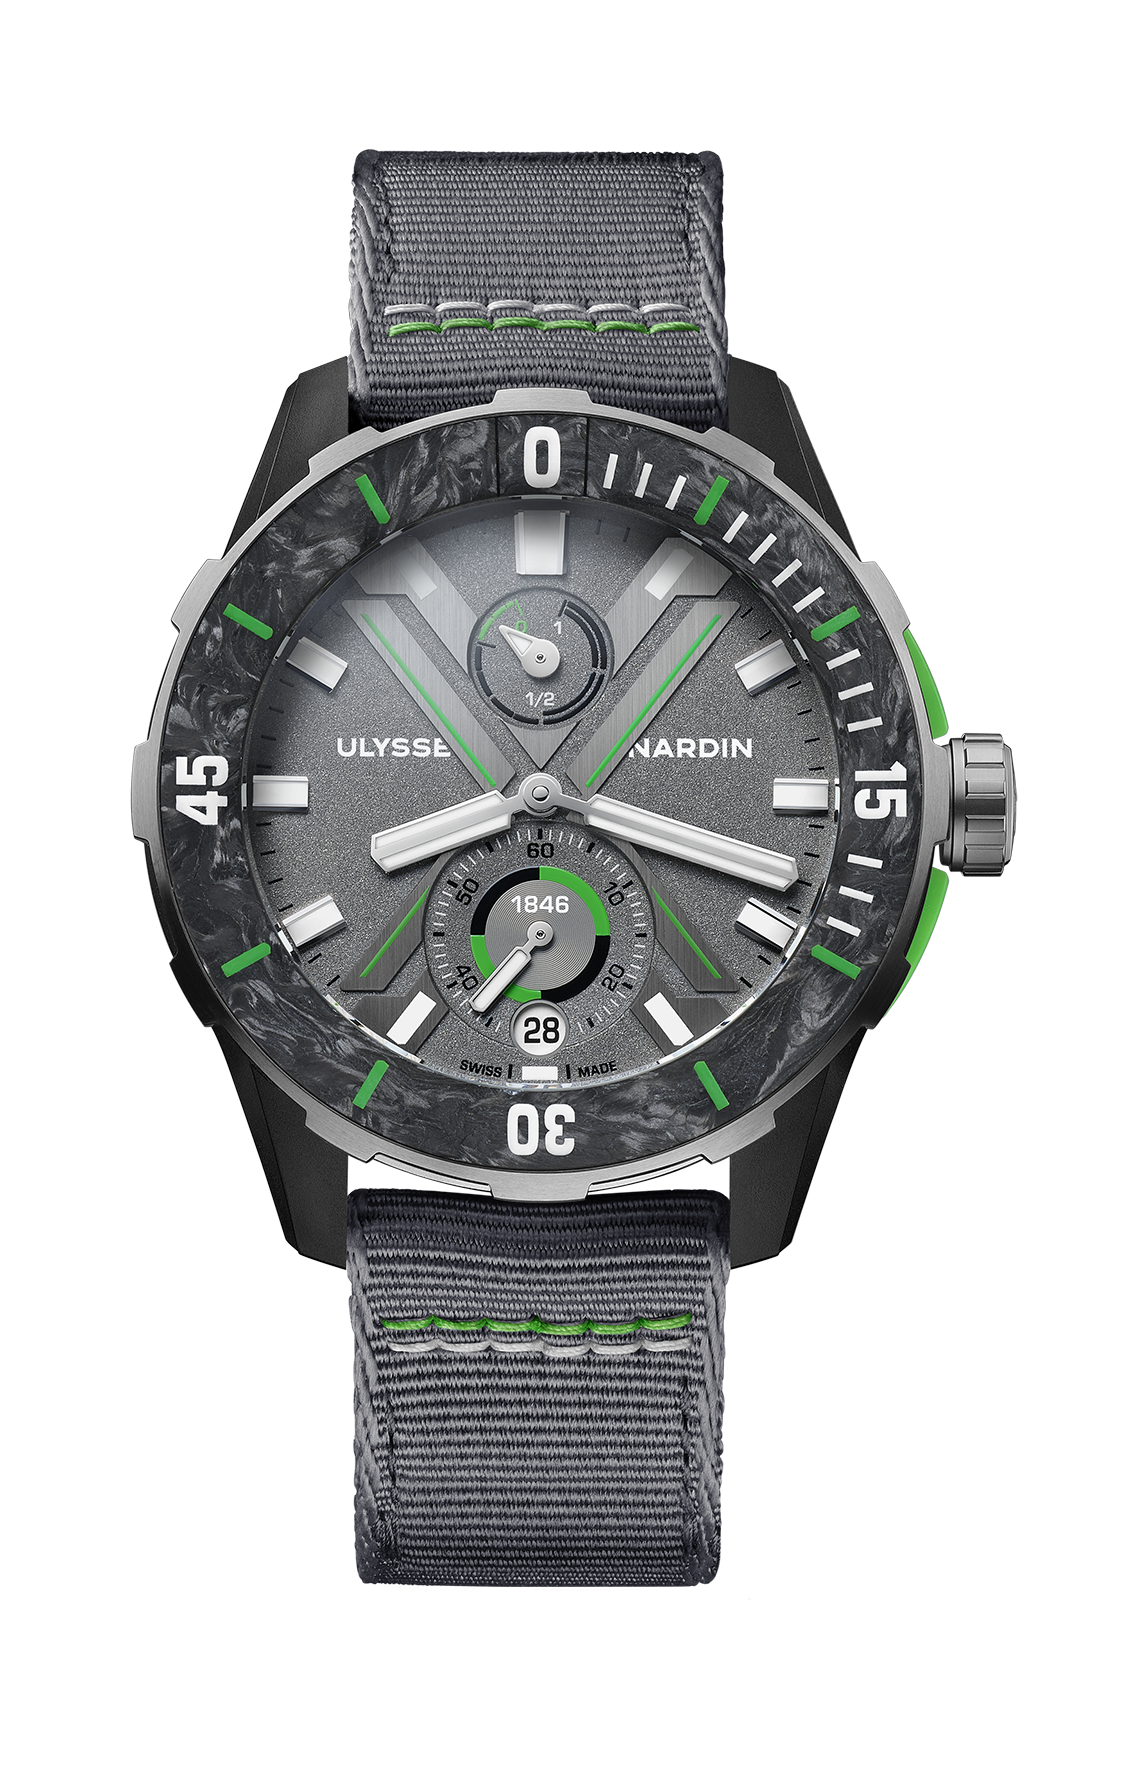 Ulysse Nardin Diver Ocean Race watch made using upcycled fishing nets found in the ocean. 